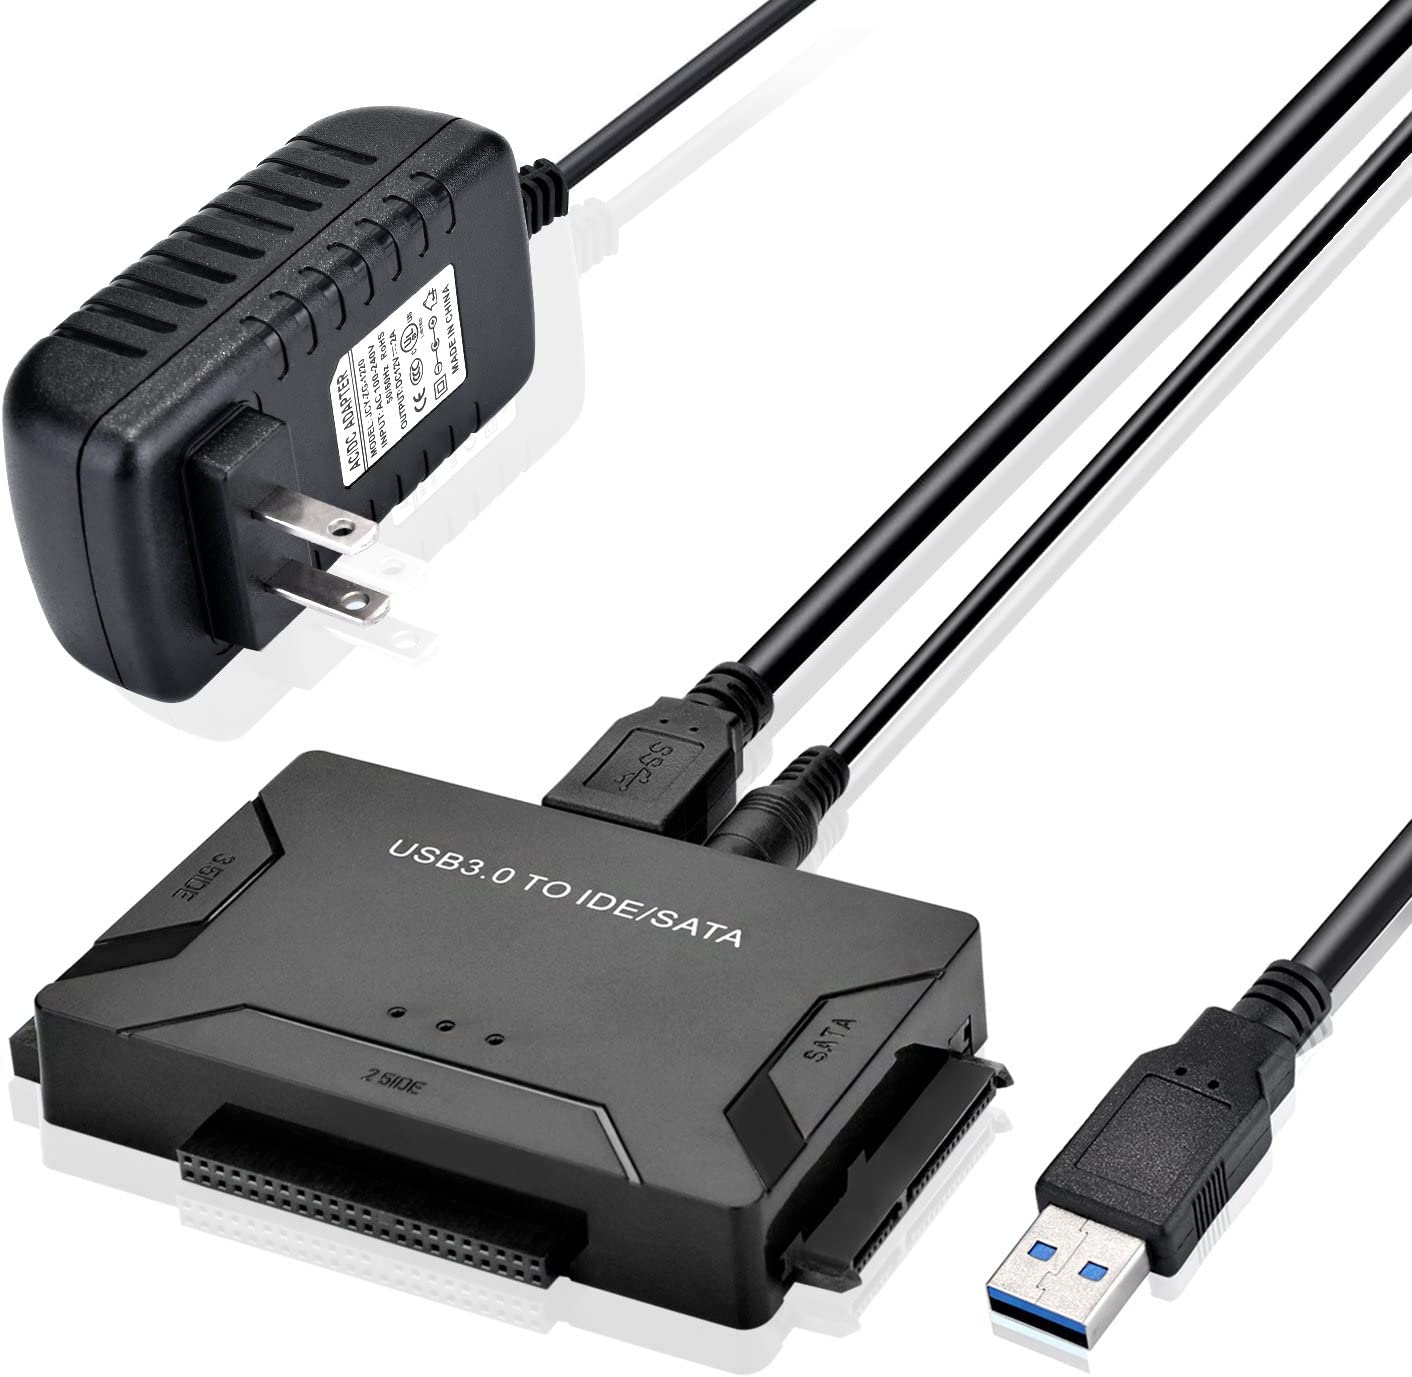 USB 3.0 to IDE/SATA Converter Adapter with Power Switch for 2.5"/3.5"  (LNC).